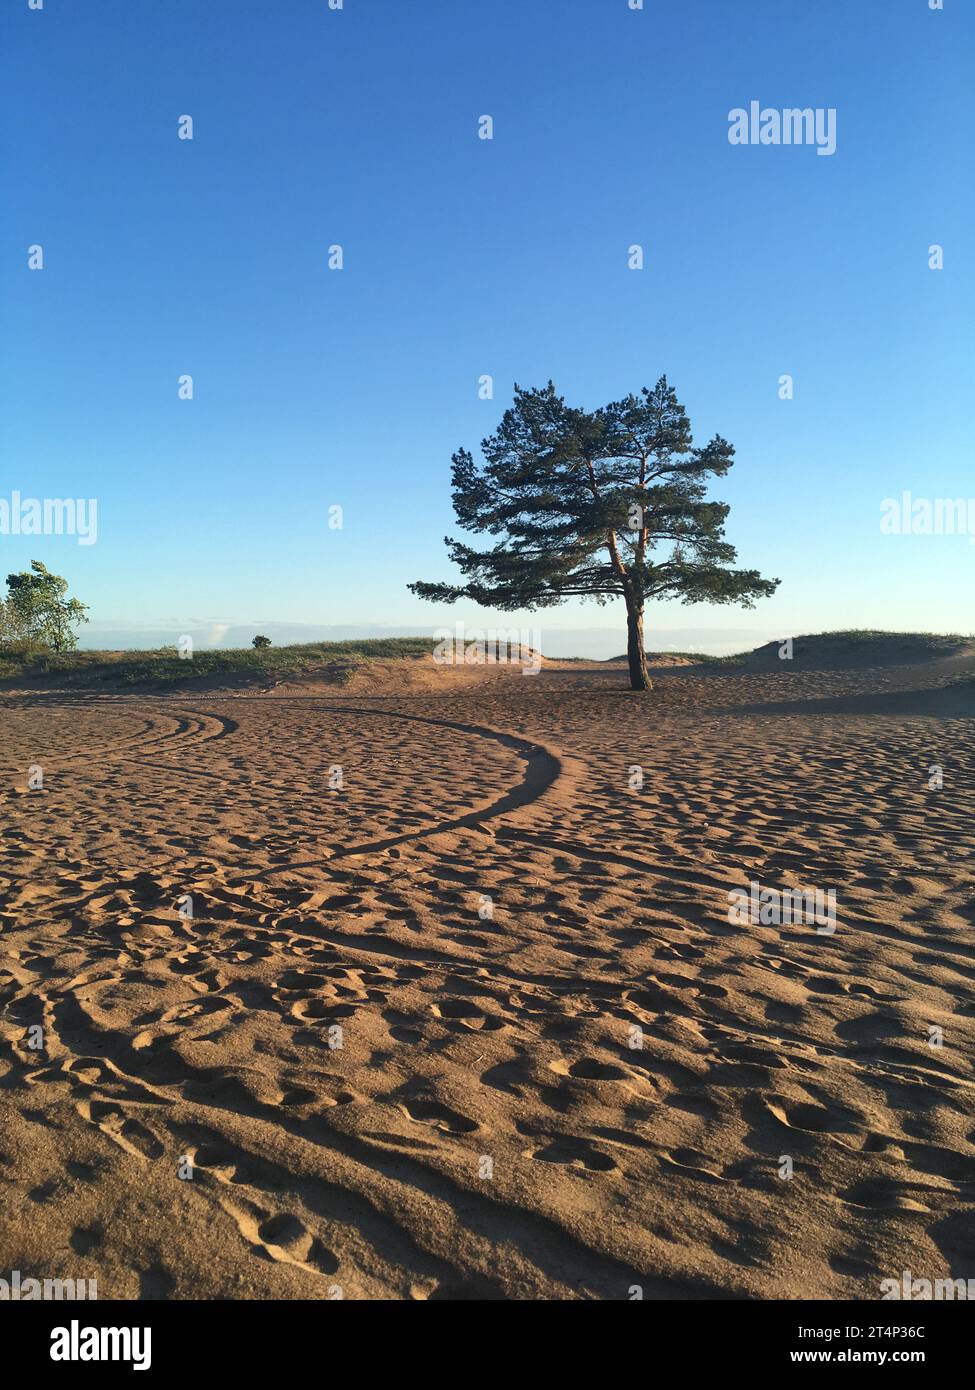 Summer seascape. A lonely pine tree on a sandy beach. Stock Photo